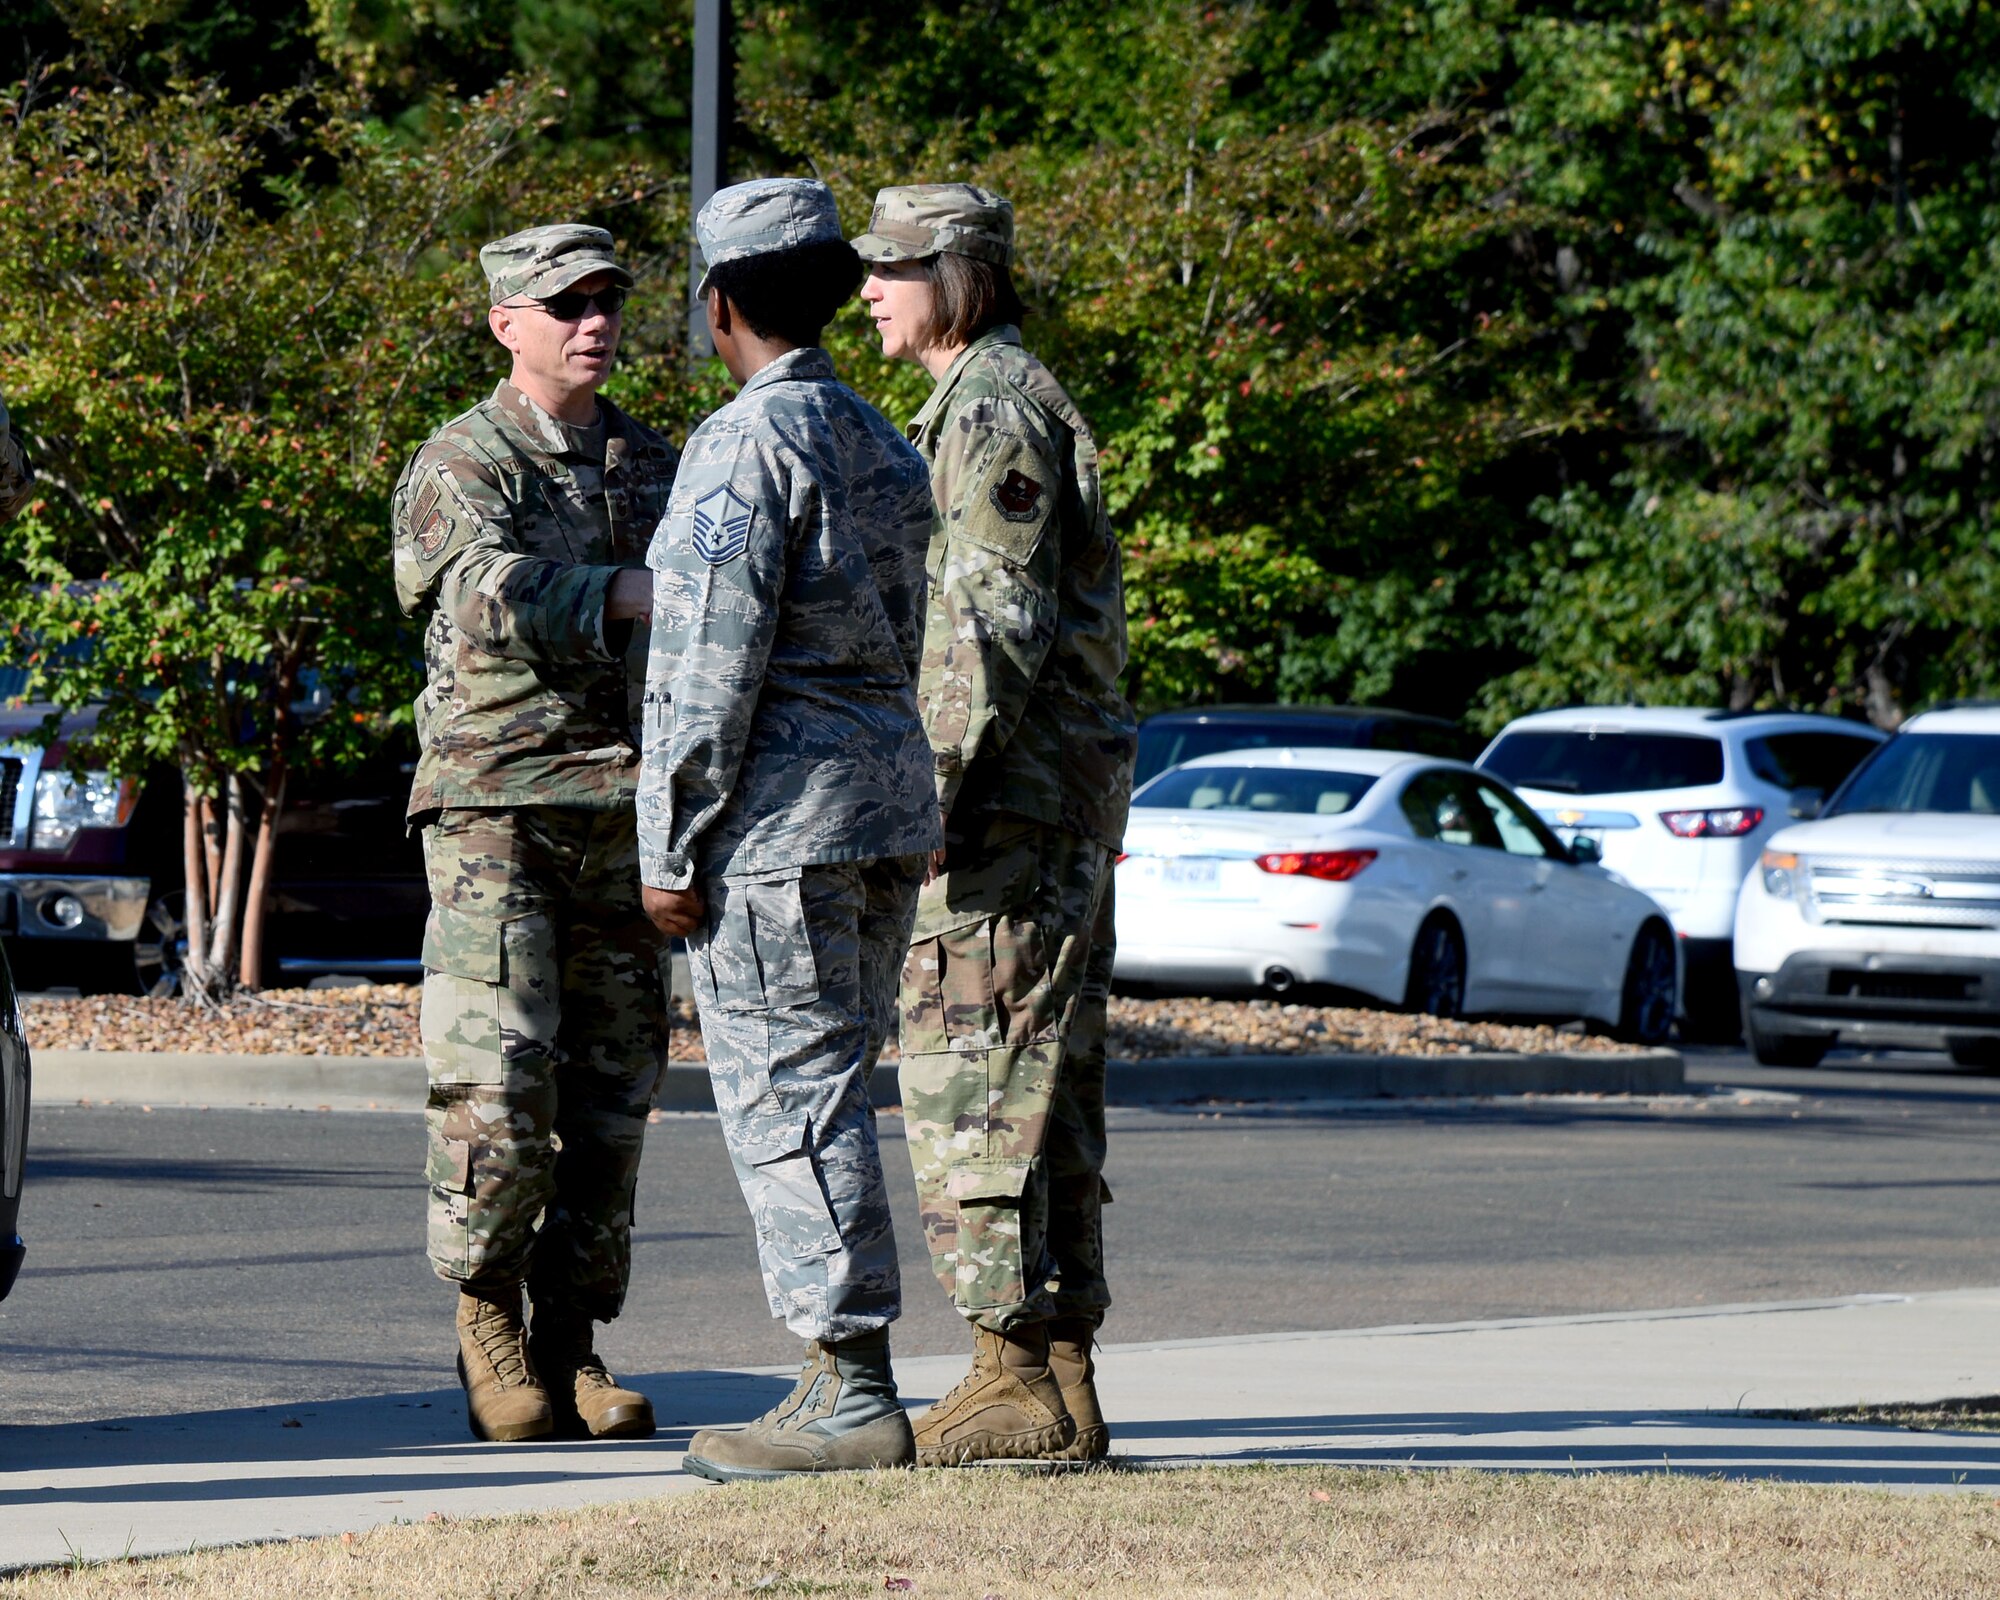 Airmen from the 14th Medical Group greet Chief Master Sgt. Erik Thompson, 19th Air Force command chief, at the Koritz Clinic Oct. 1, 2019, on Columbus Air Force Base, Miss. Thompson, along with Maj. Gen. Craig Wills, 19th AF commander, visited the base Sept. 30-Oct. 3 and spoke with key members of different squadrons about the innovative ways they are making the base and its systems better. (U.S. Air Force photo by Airman 1st Class Jake Jacobsen)